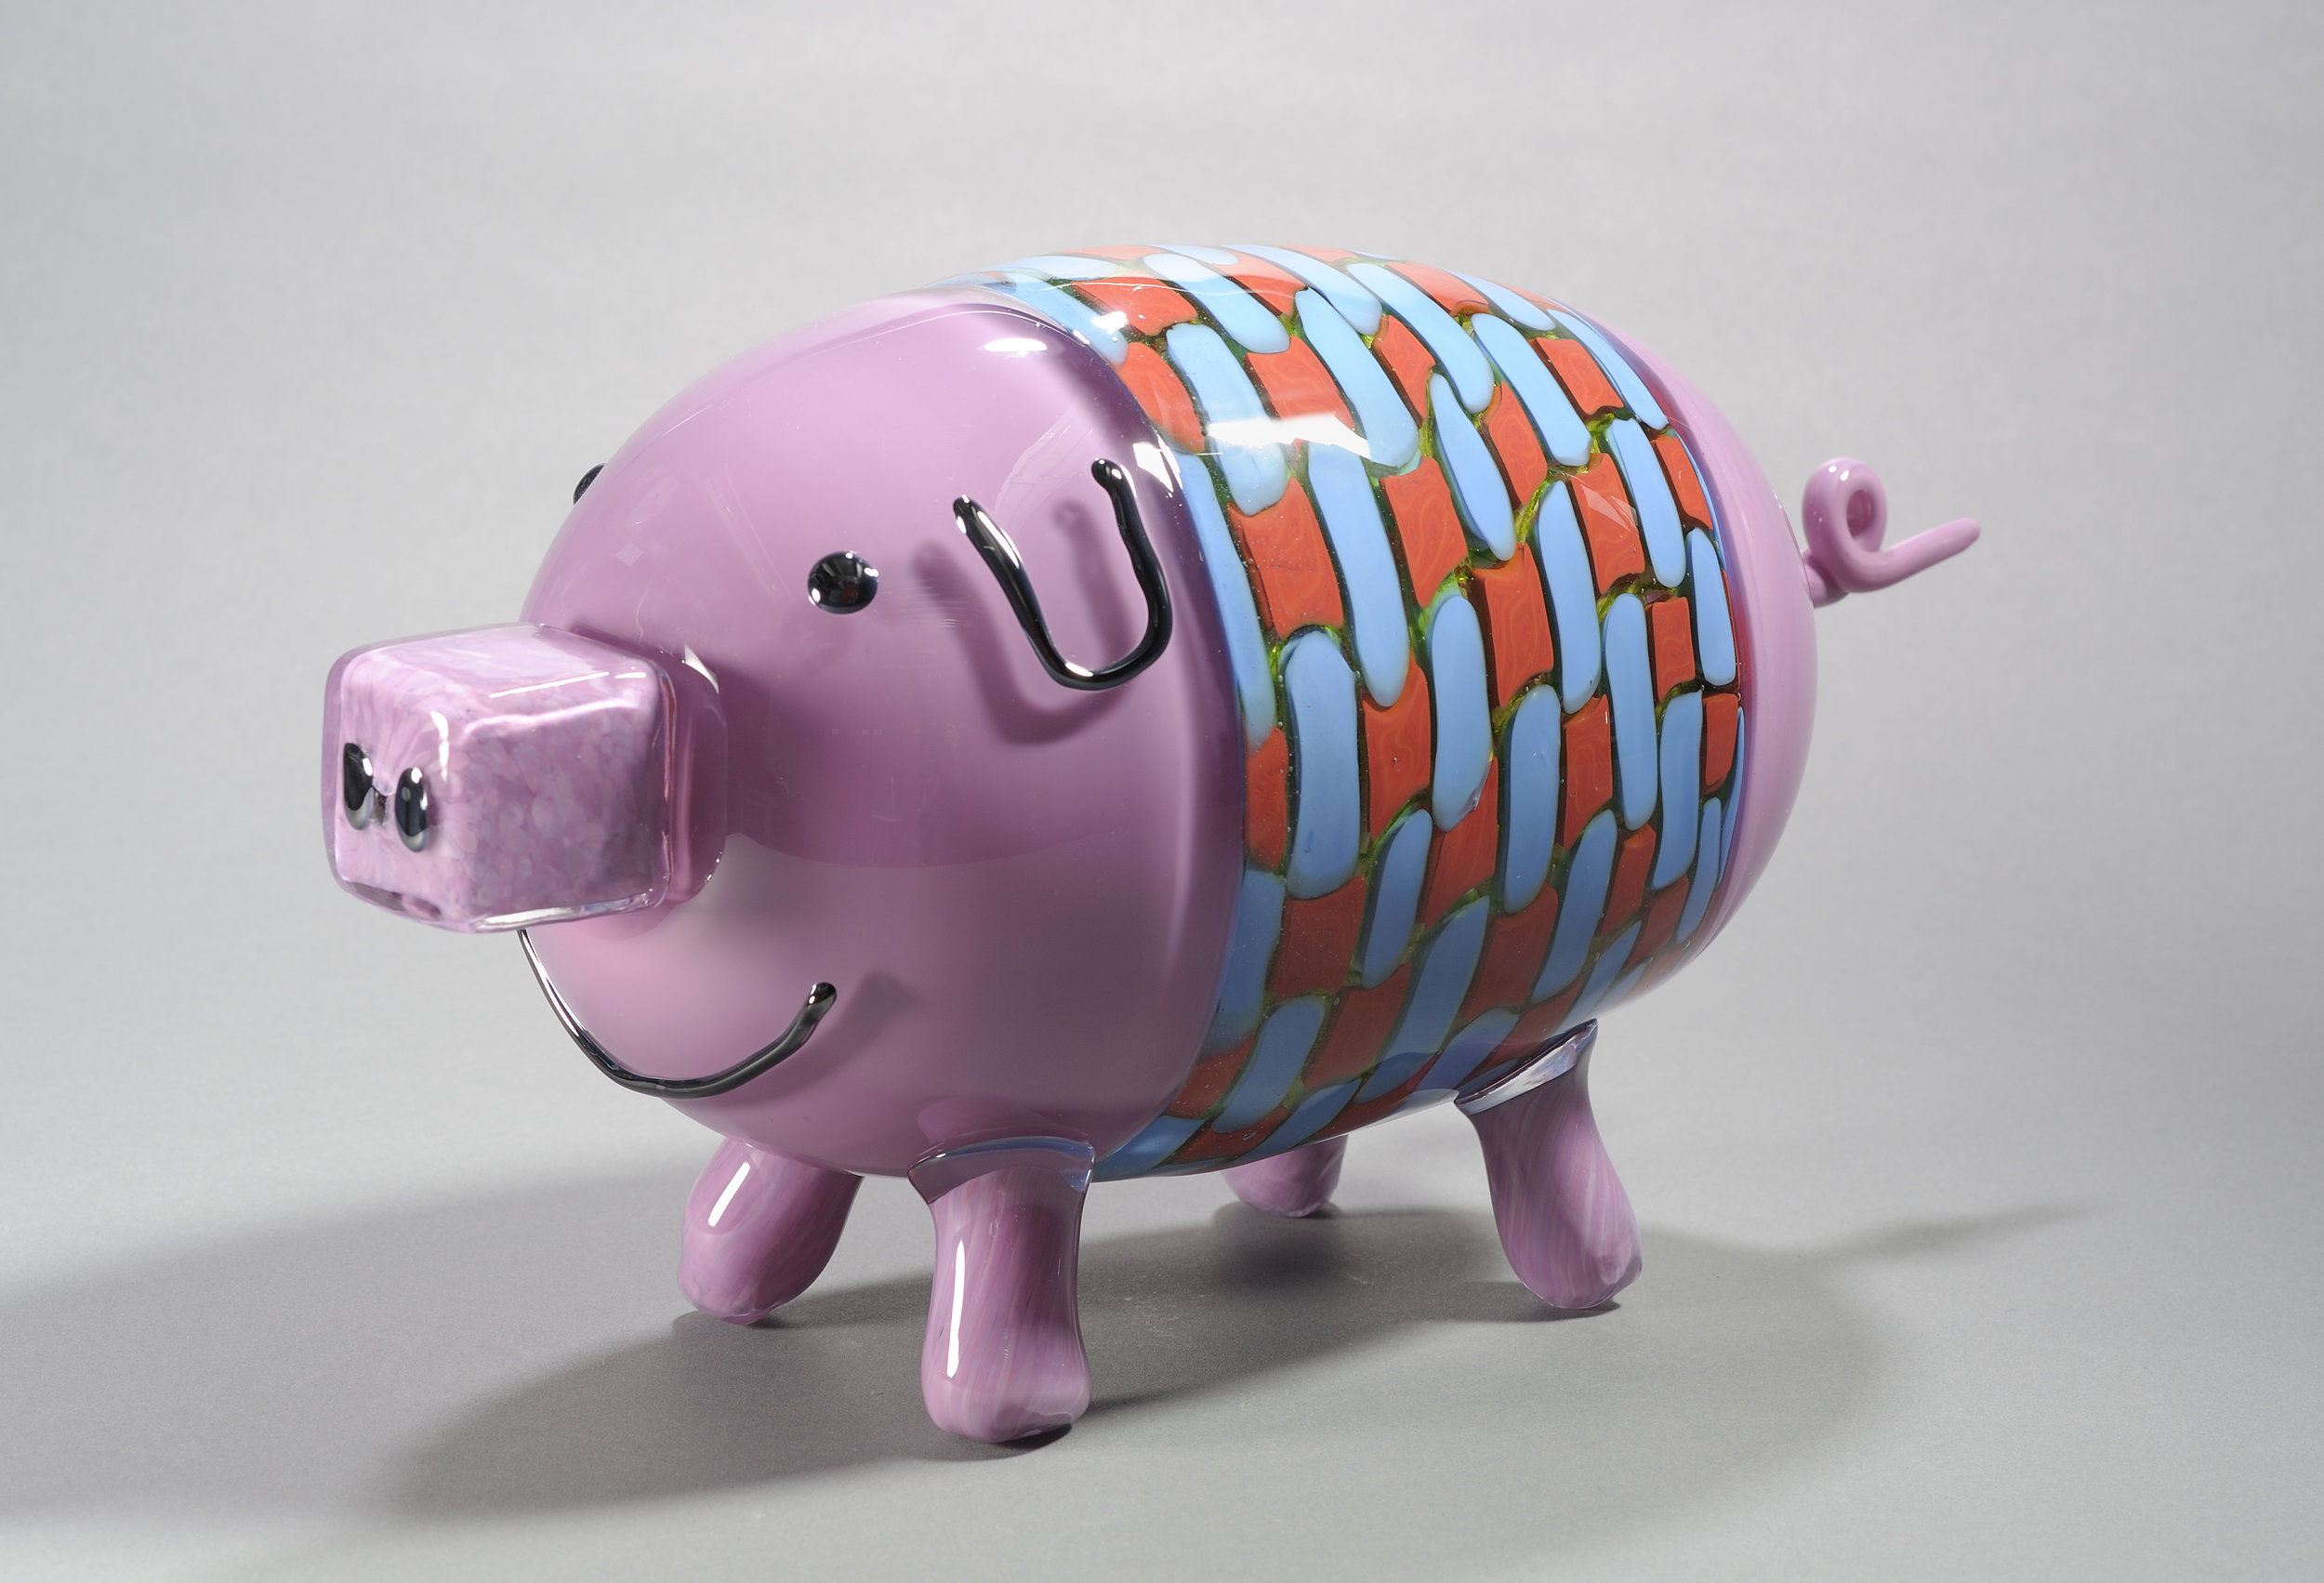  Designed by Forrest Brennan (age 10), made by Museum of Glass Hot Shop Team.&nbsp; Pig in a blanket,  2010.&nbsp;Blown and hot-sculpted glass;&nbsp;8 1/4 x 15 x 6 in.&nbsp;Collection of Museum of Glass, Tacoma, Washington.&nbsp;Photo by Duncan Price